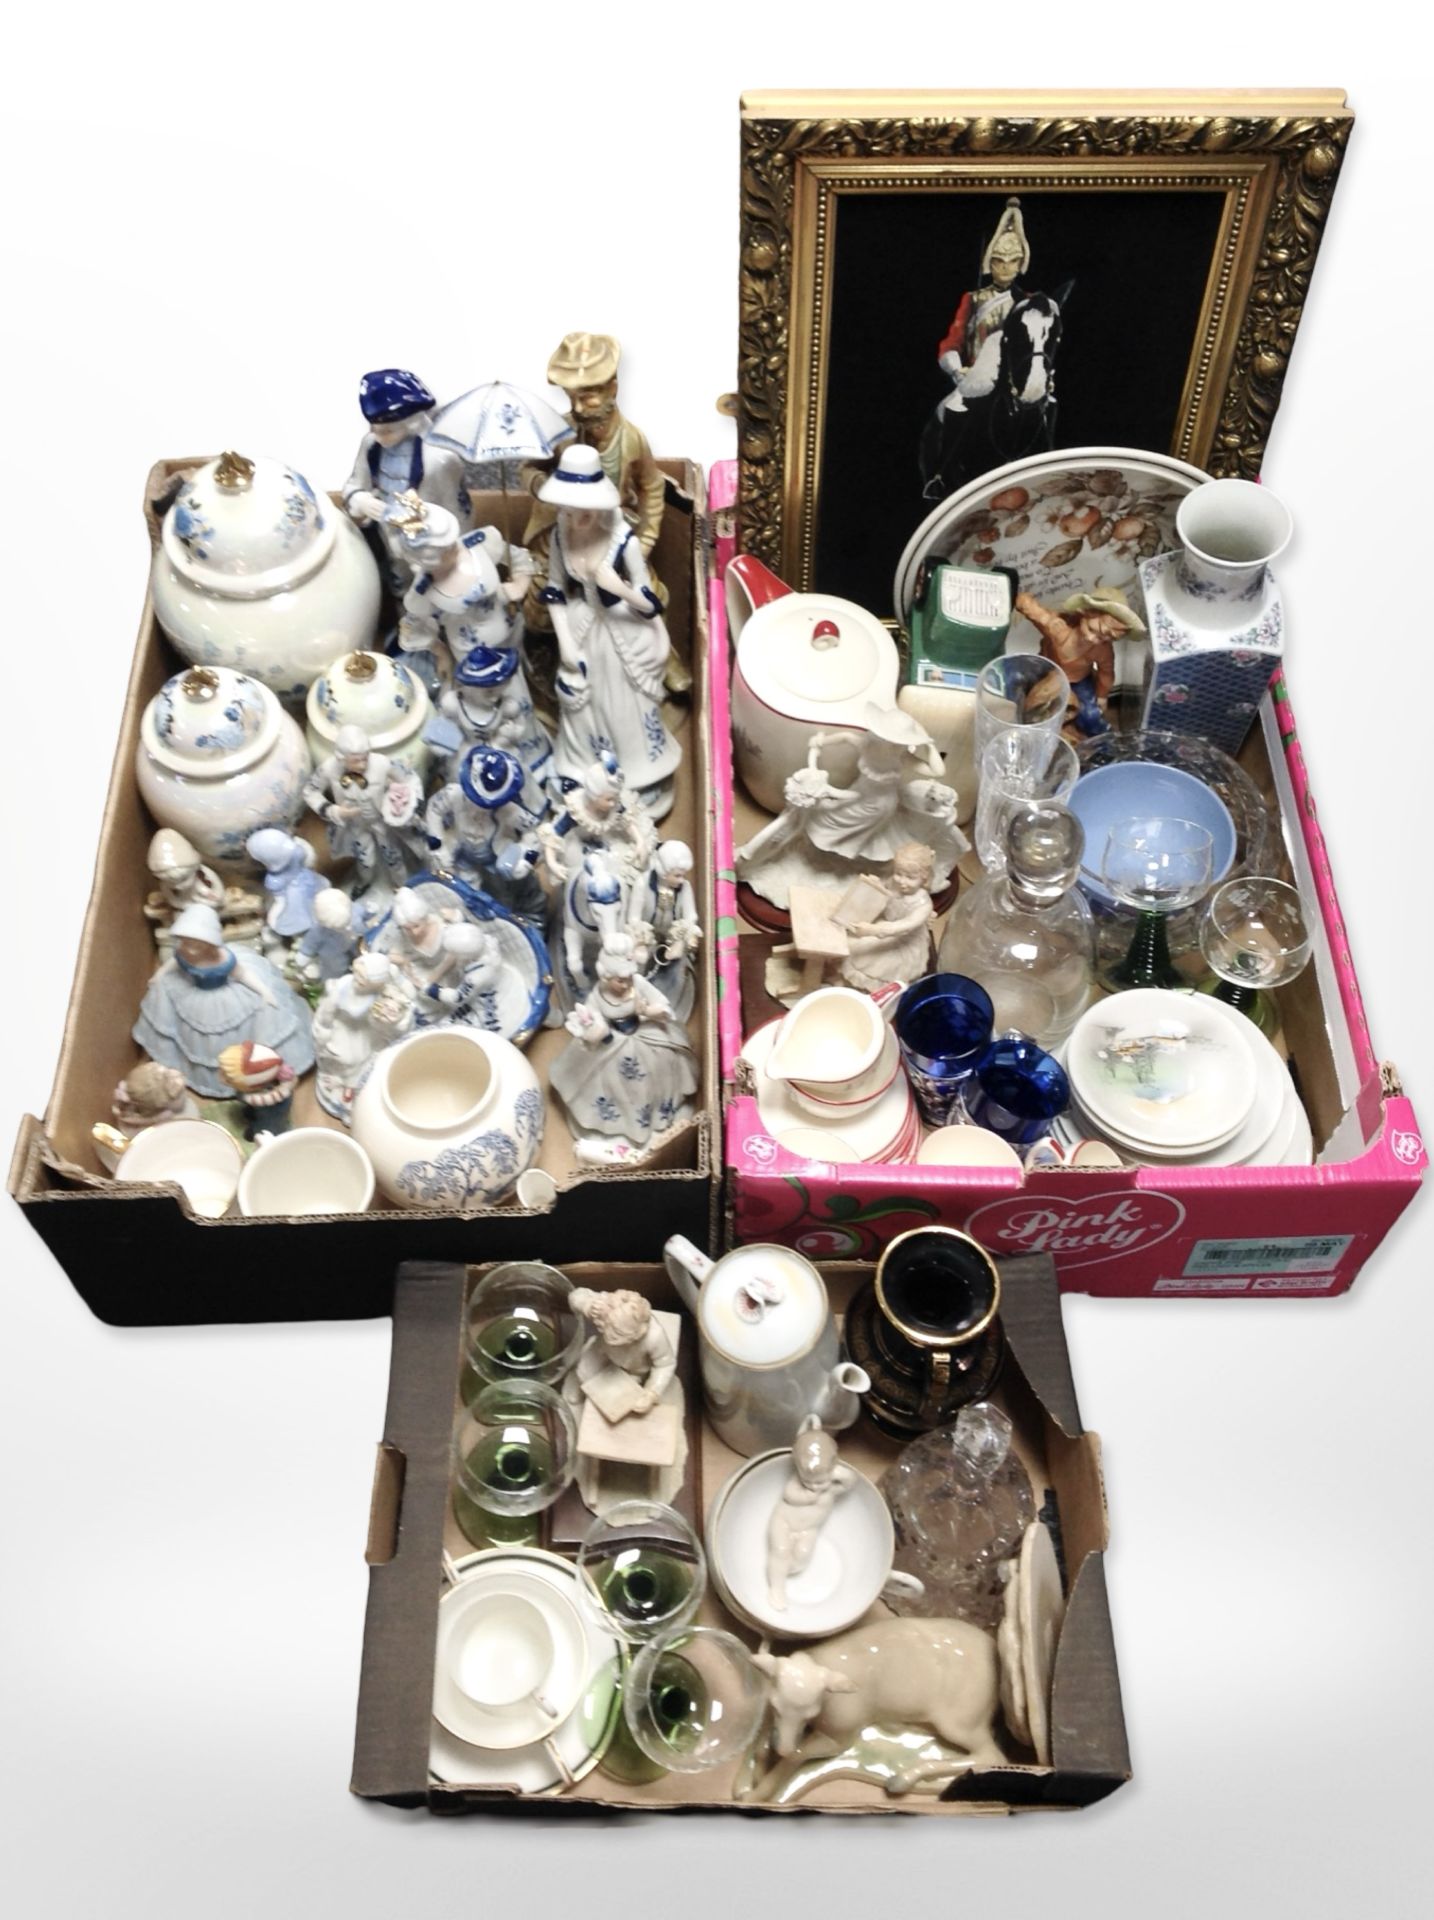 A quantity of continental porcelain figurines, lustre vases, drinking glasses, gilt-framed painting,